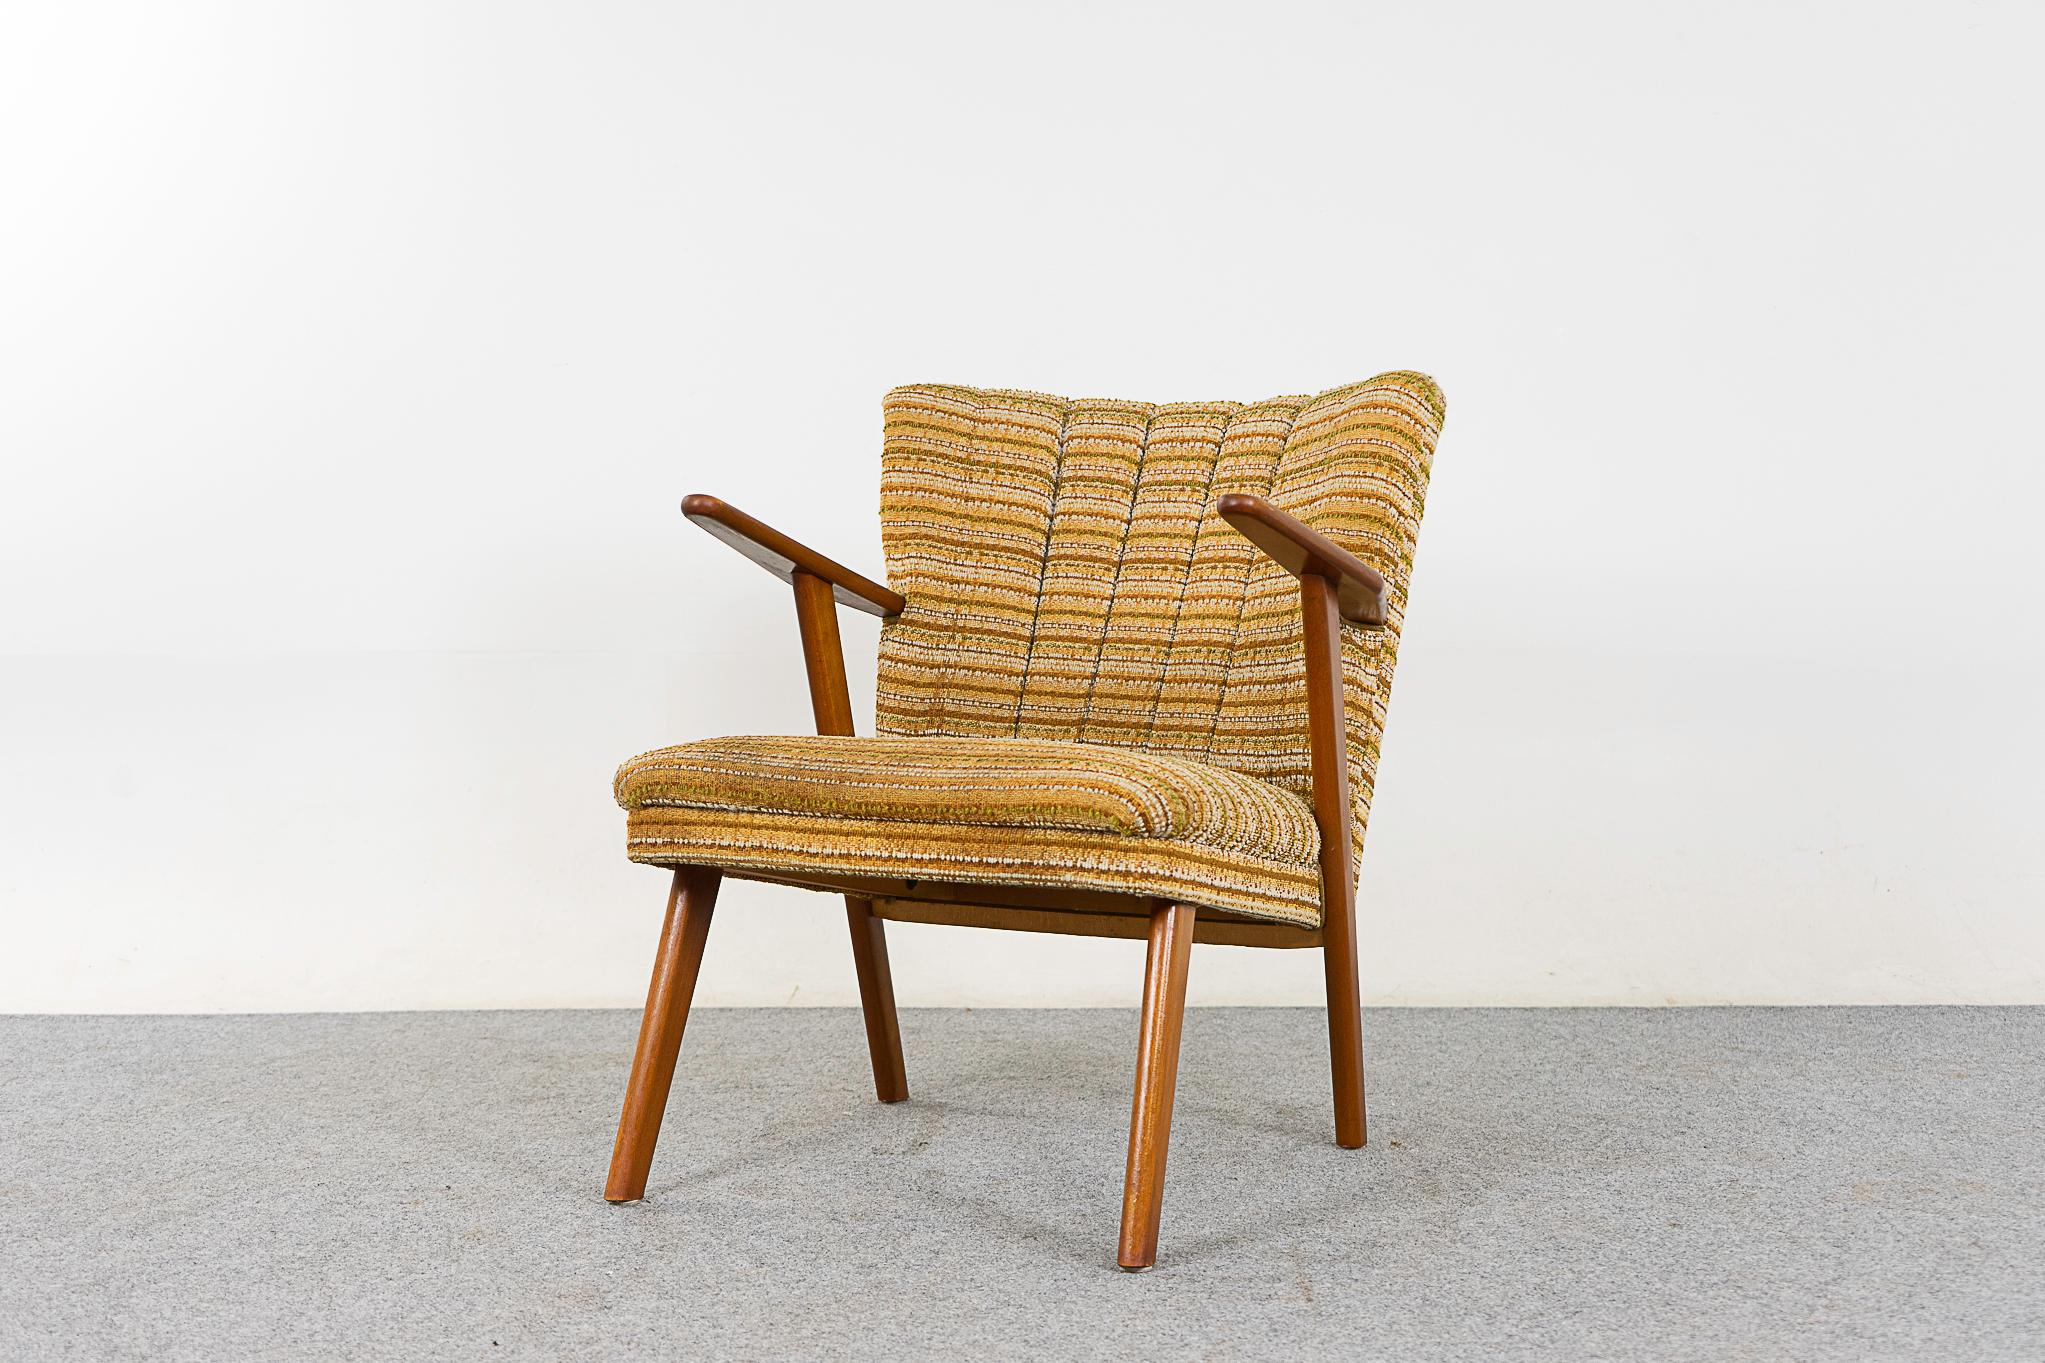 Beech wood Danish lounge chair, circa 1950's. Charming chair with original textured scalloped upholstery, solid beech wood frame with splayed legs. Sold in 